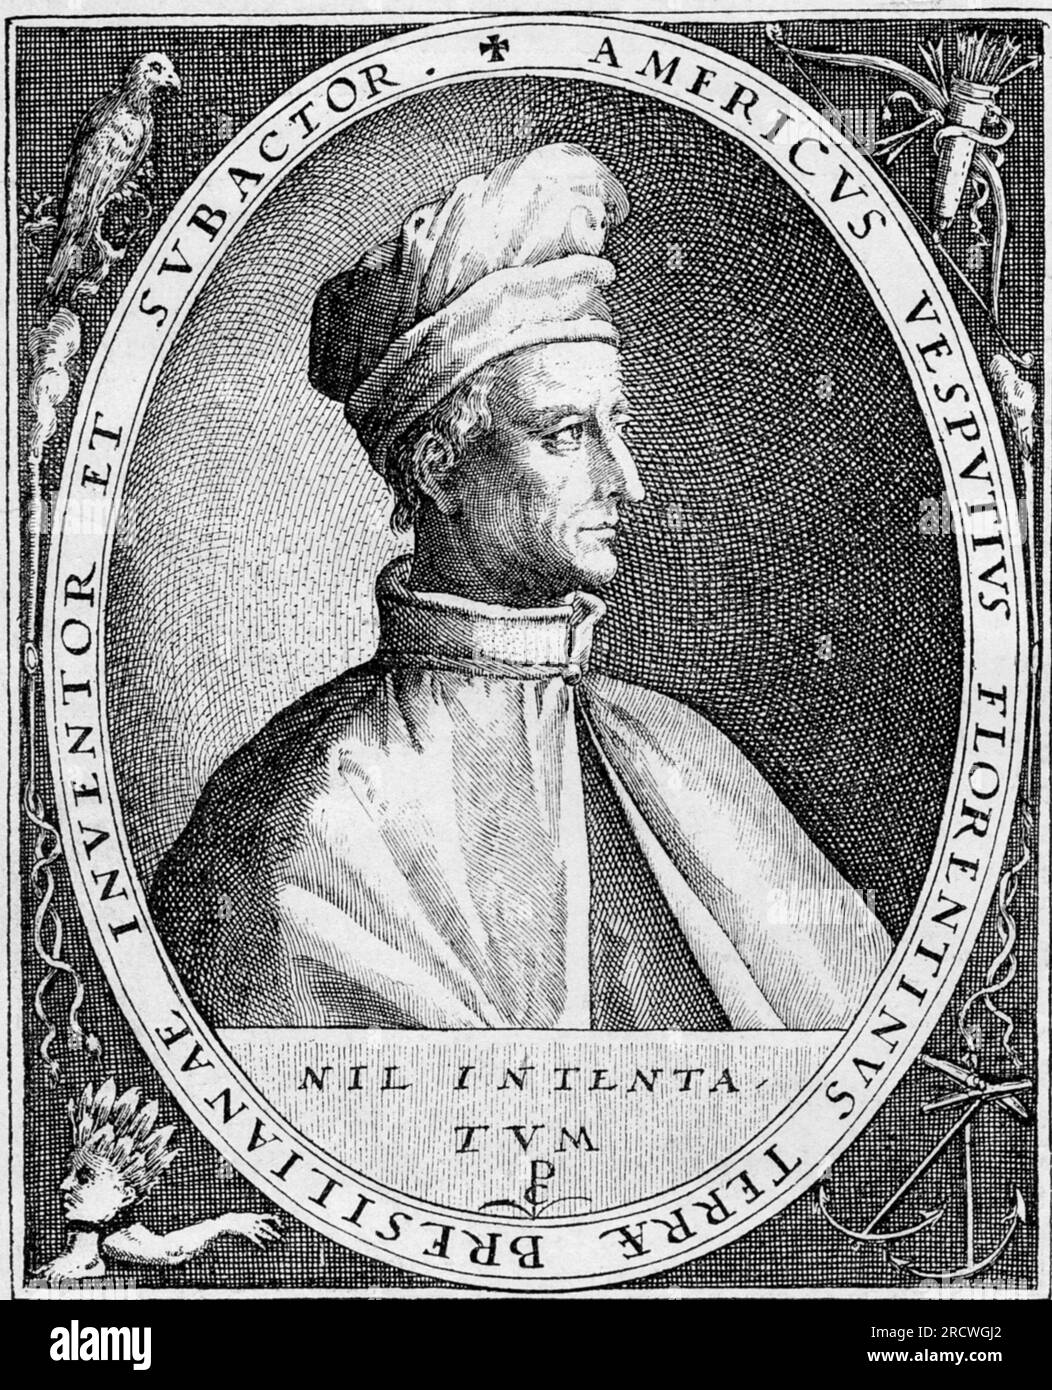 Vespucci, Amerigo, 9.3.1454 - 22.2.1512, Italian navigator and discoverer, ADDITIONAL-RIGHTS-CLEARANCE-INFO-NOT-AVAILABLE Stock Photo